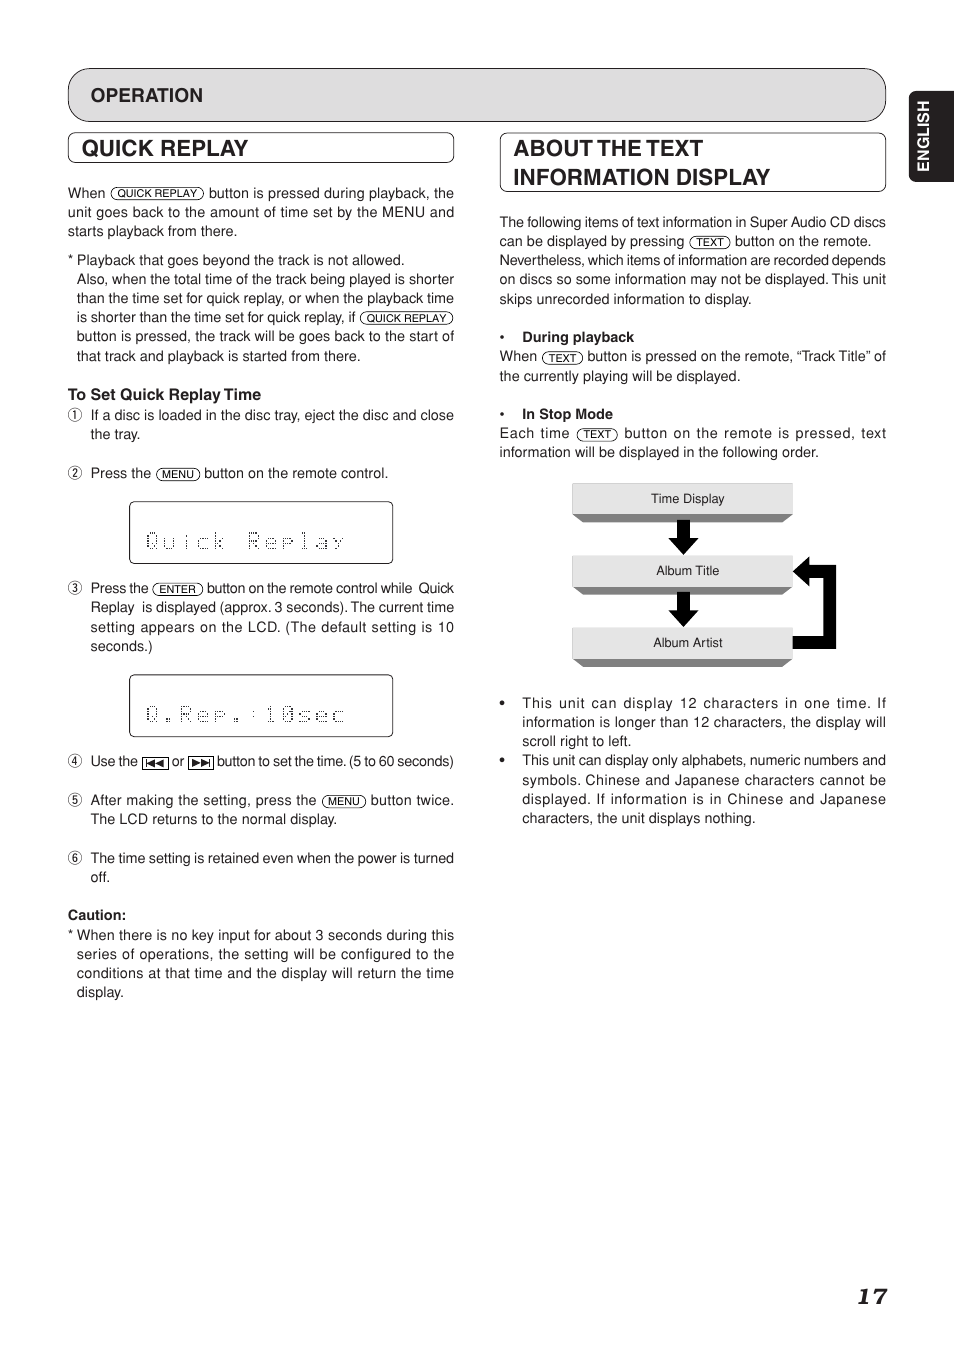 Quick replay, About the text information display, Operation | Marantz SA-15S1 User Manual | Page 21 / 25